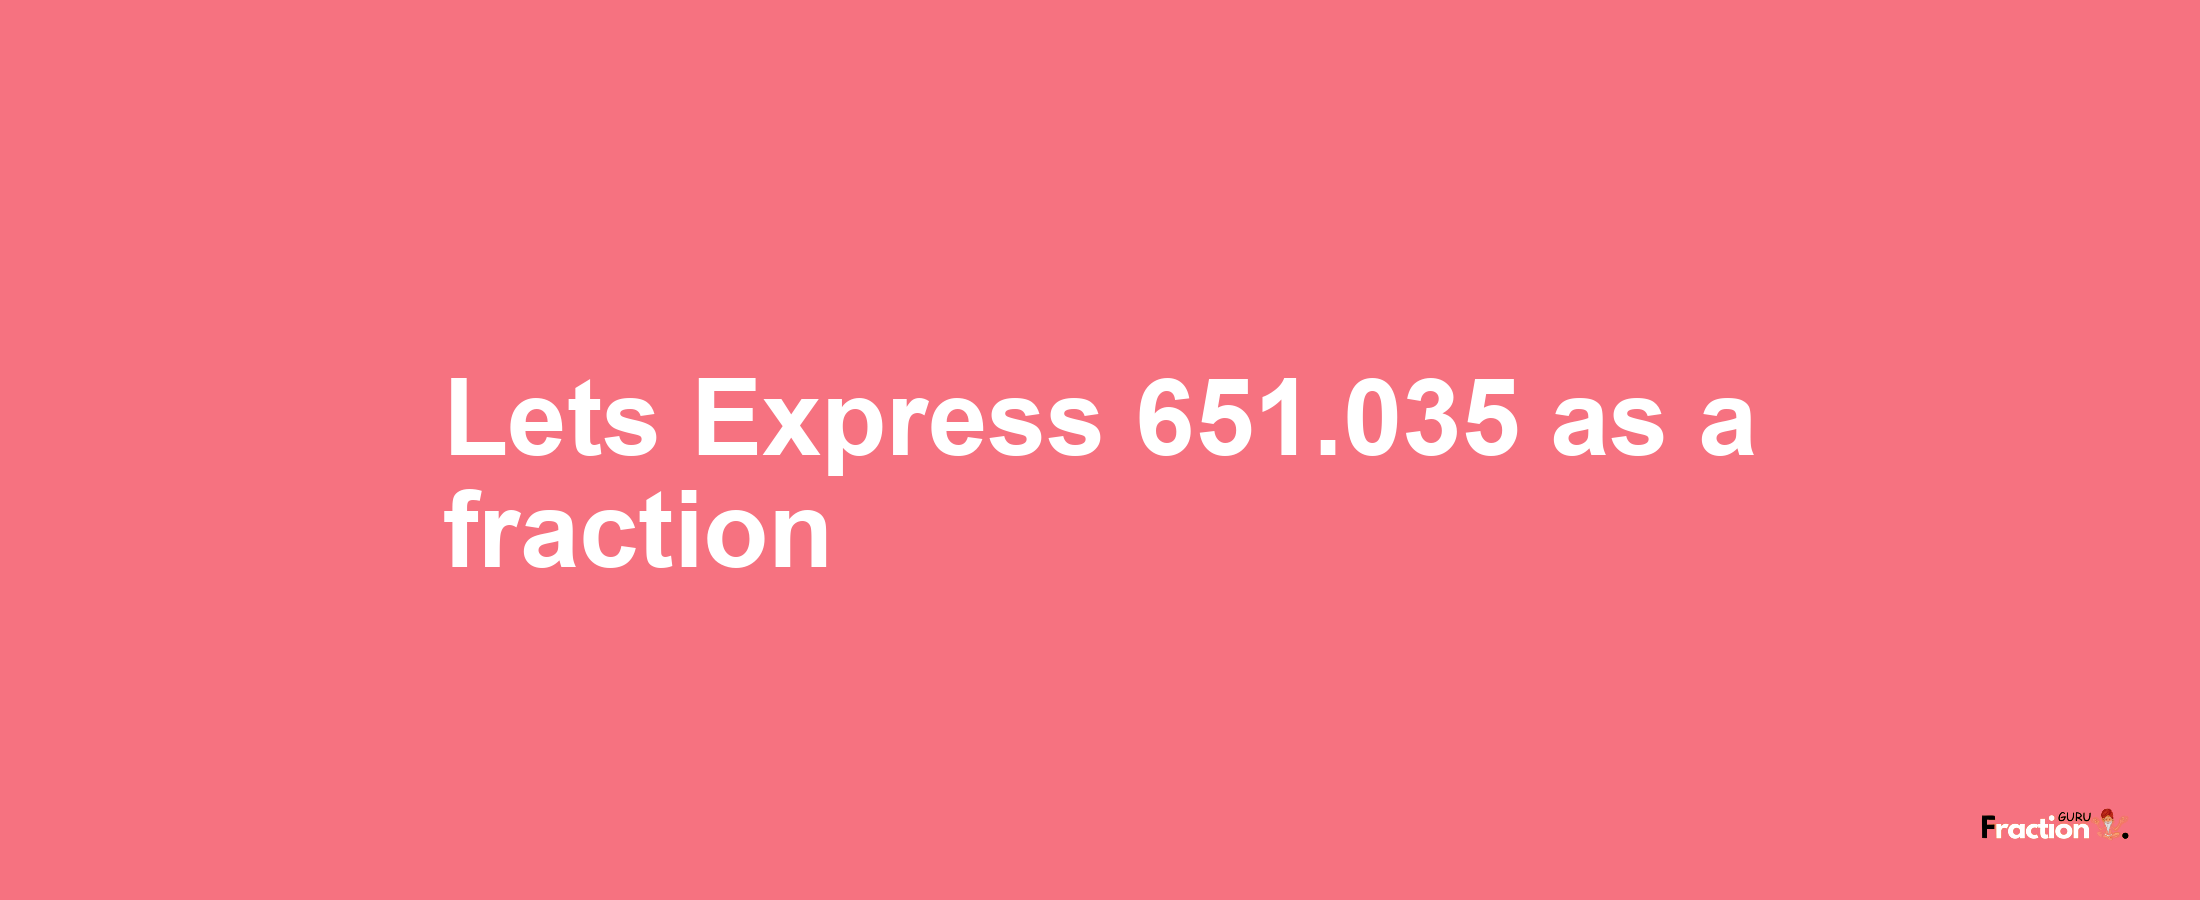 Lets Express 651.035 as afraction